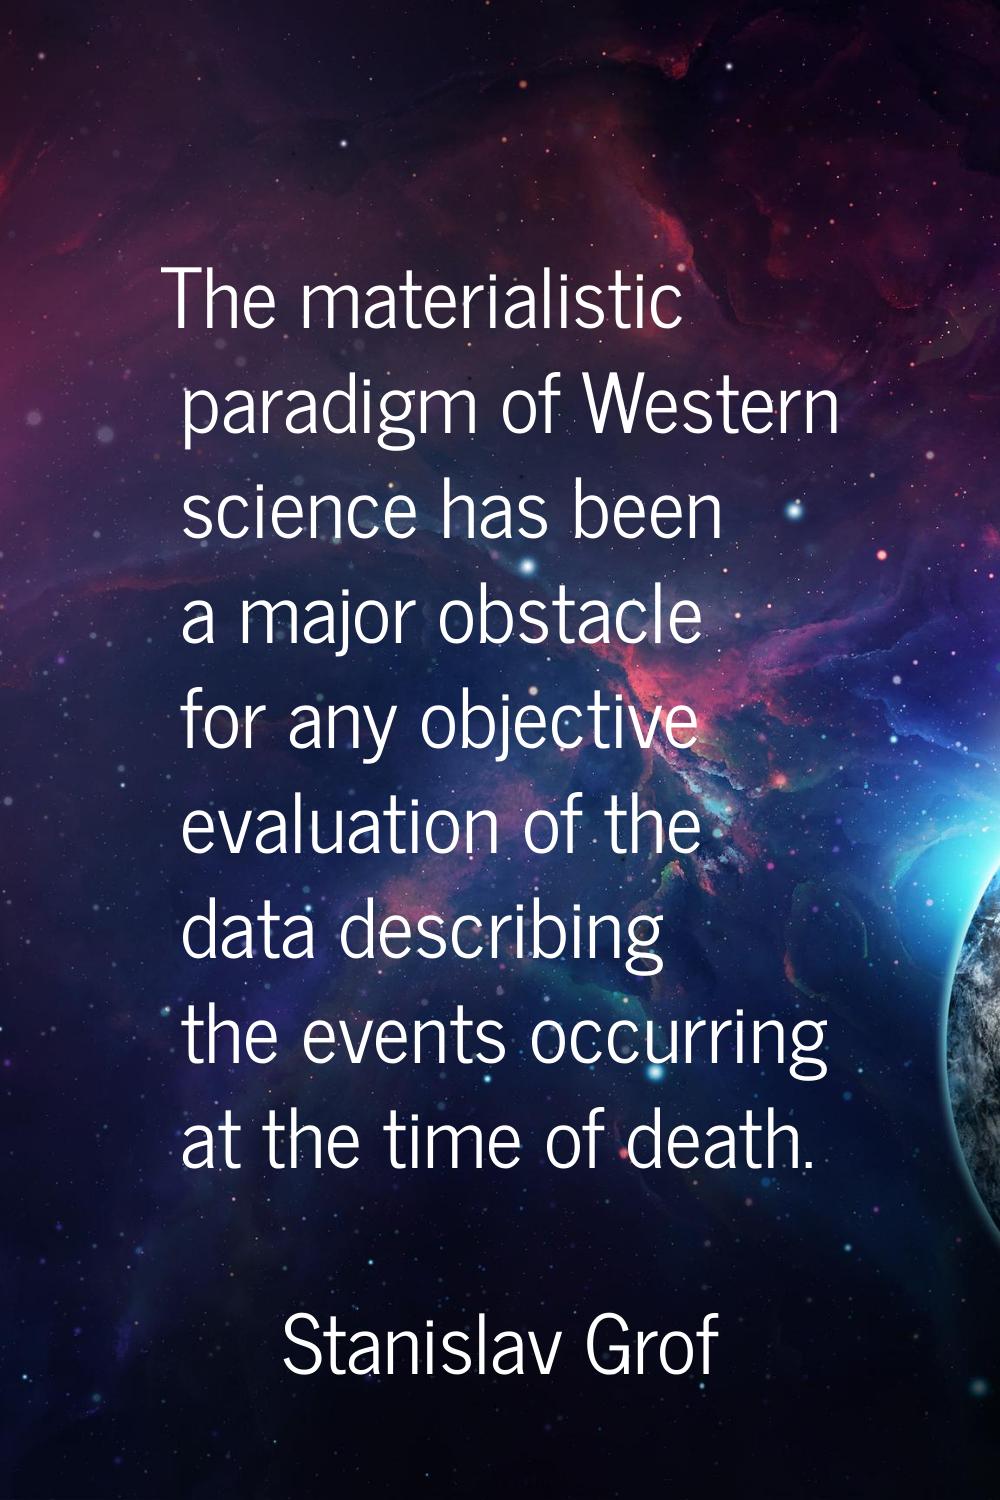 The materialistic paradigm of Western science has been a major obstacle for any objective evaluatio